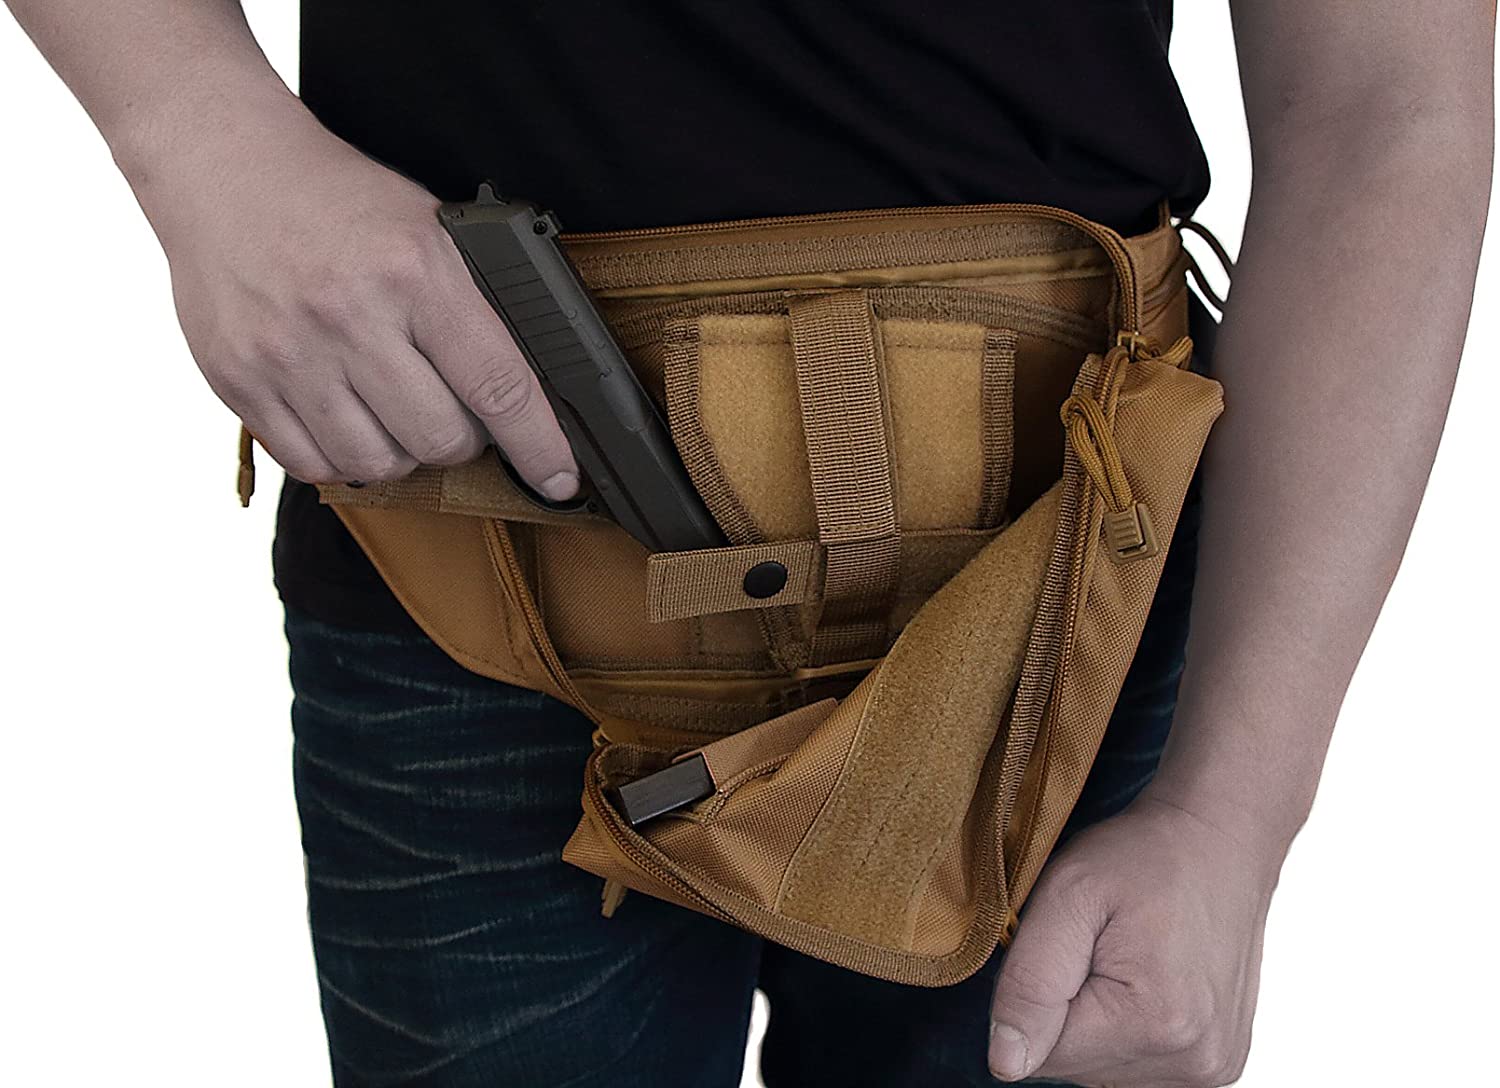 Concealed Gun Pouch Carry Pistol Holster Fanny Pack